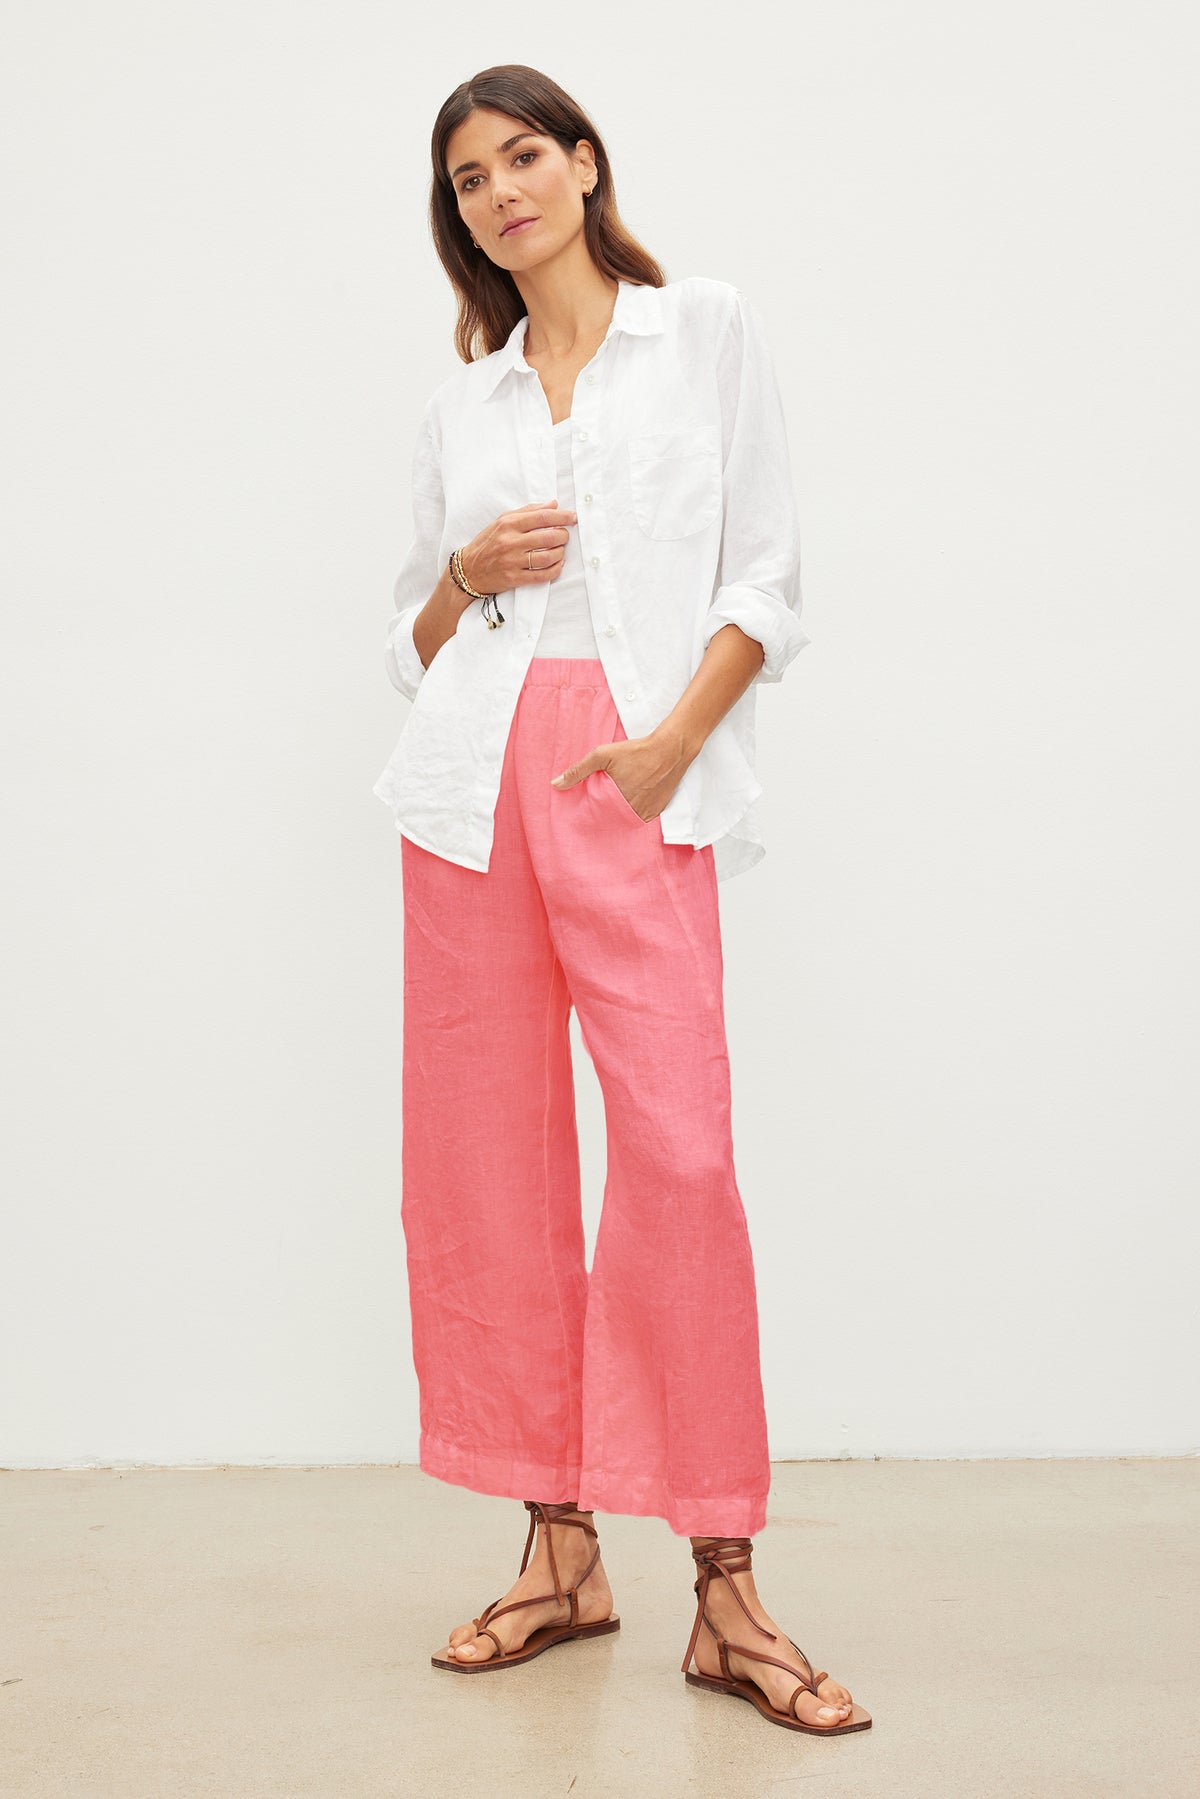 A woman stands against a plain white background, wearing a white button-up shirt and pink Velvet by Graham & Spencer LOLA LINEN PANT with an elastic waist. She has brown hair and is wearing sandals.-37260951126209